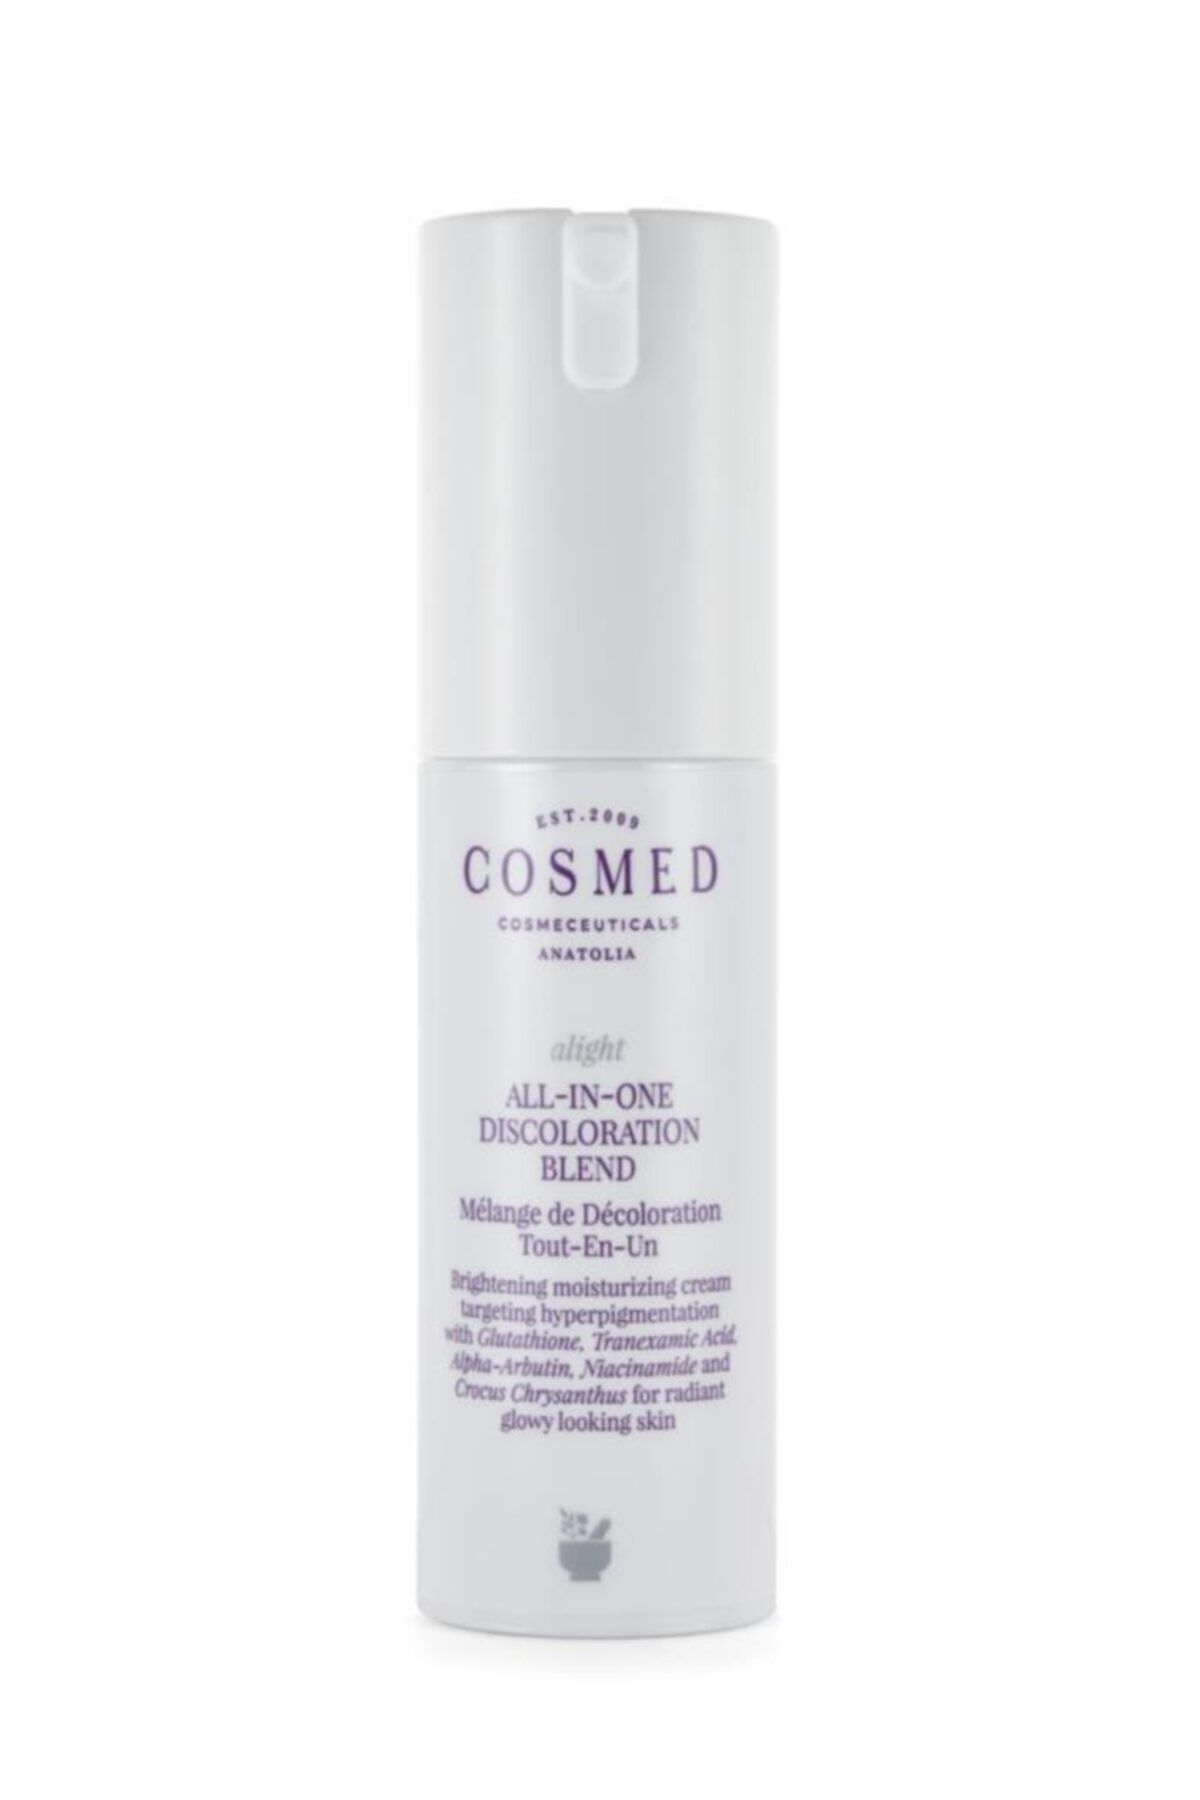 COSMED Alight All-ın-one Discoloration Blend 30 Ml